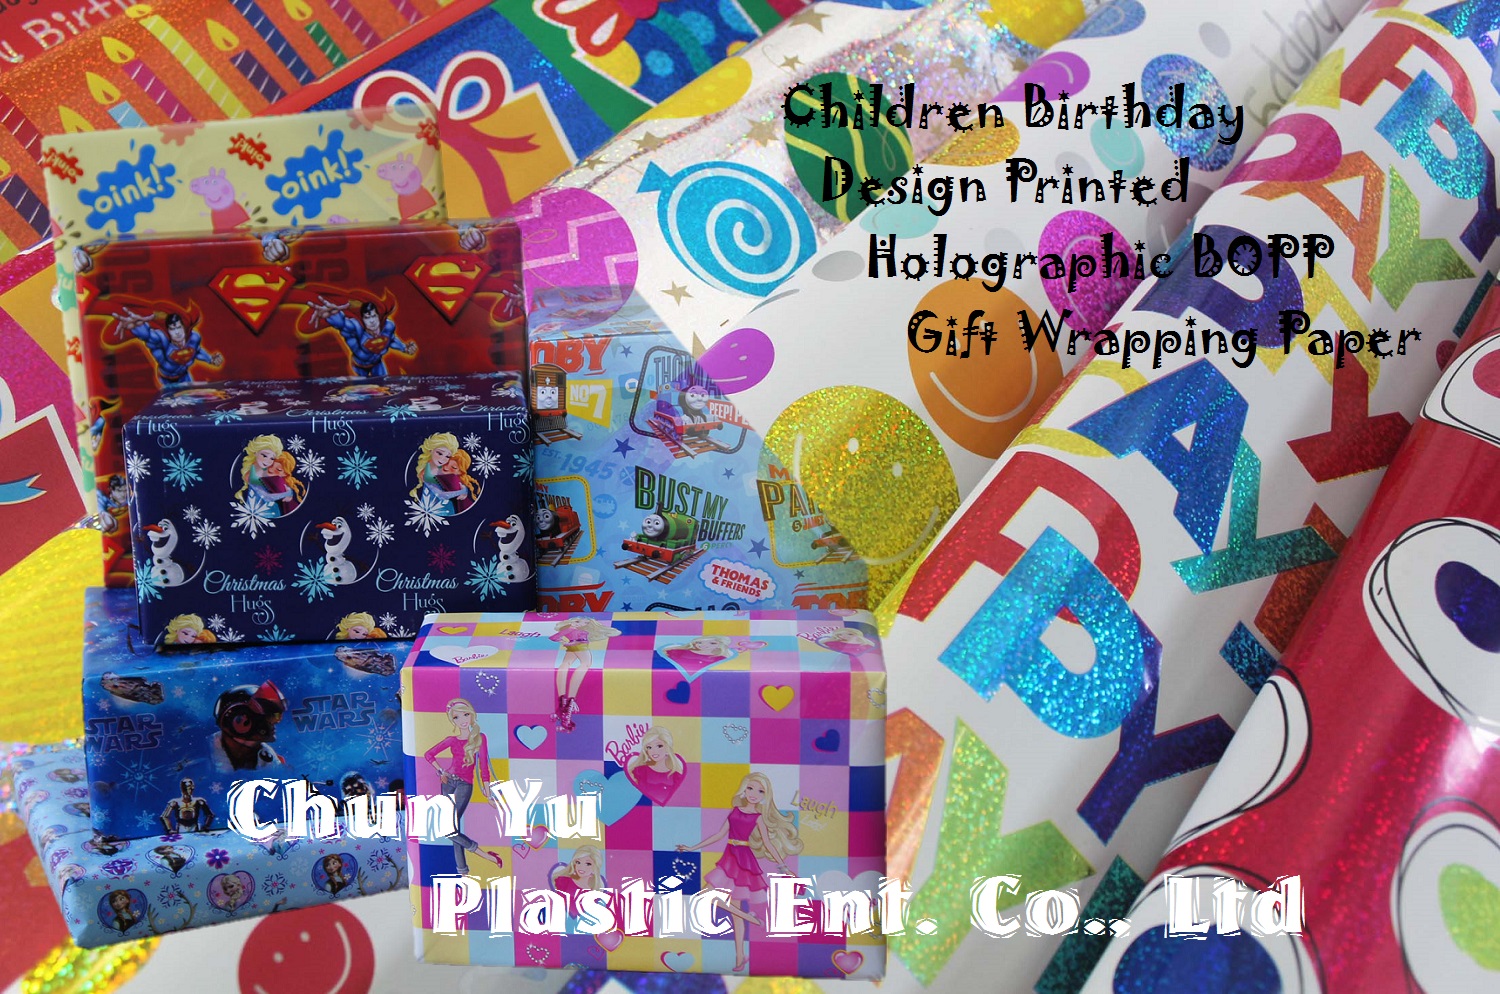 Holographic BOPP gift wrapping paper printed with fun and cute designs for children and birthday parties.